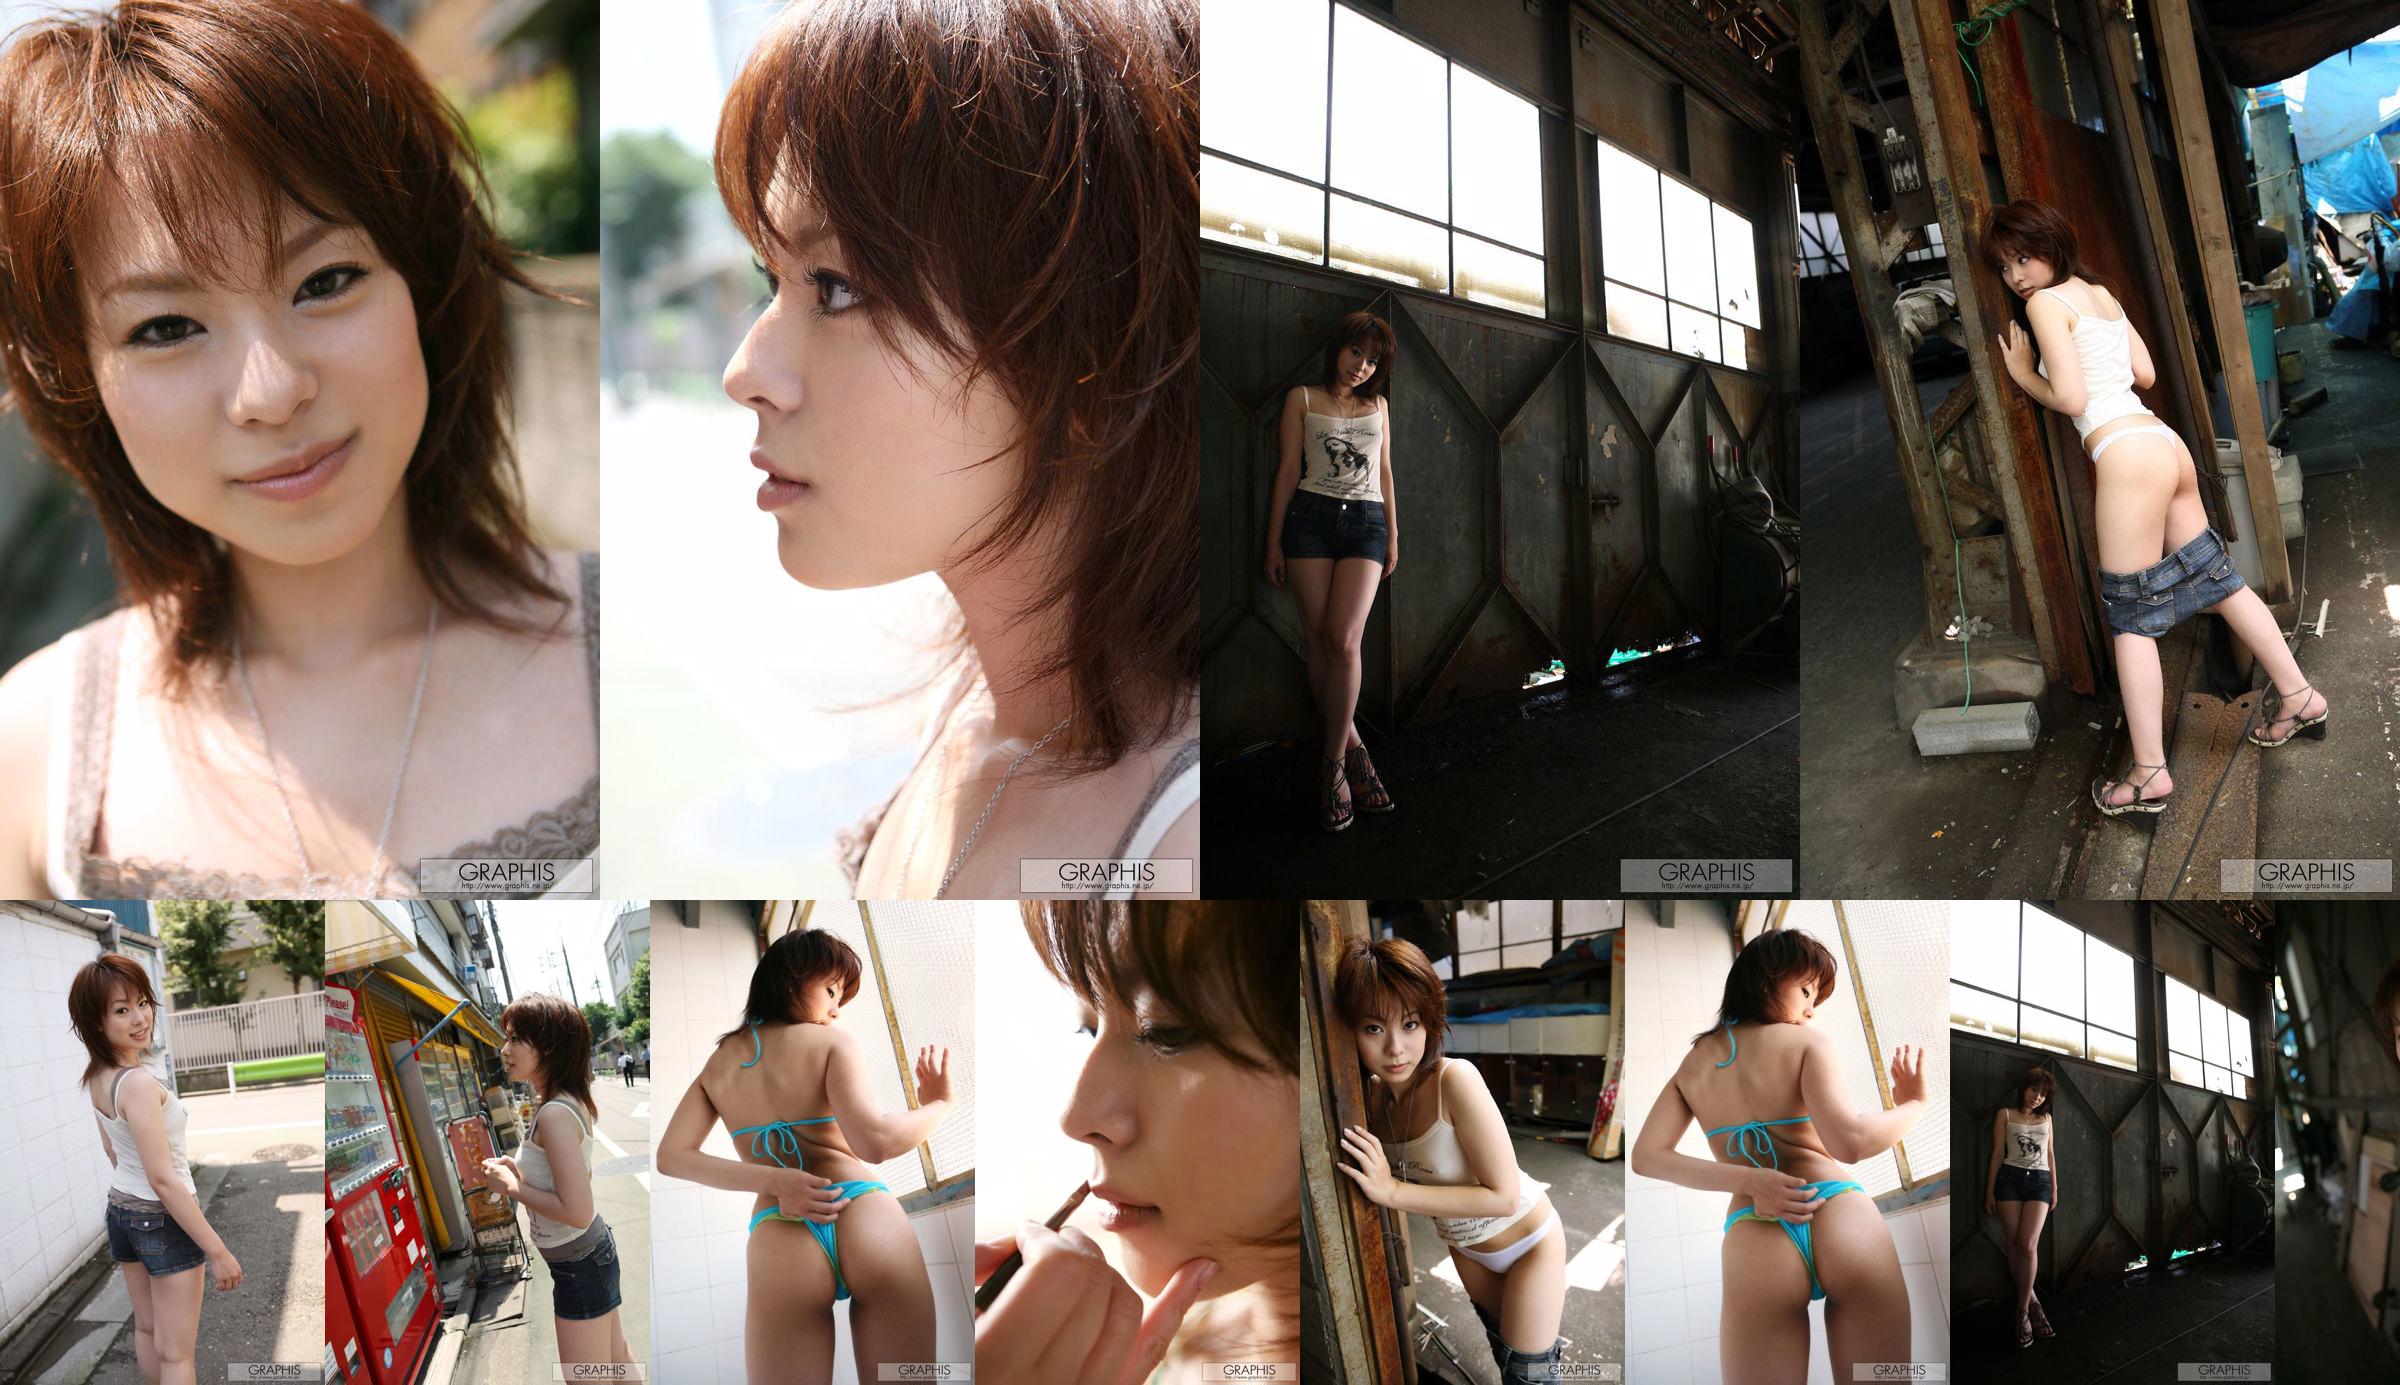 Mina Manabe Mina Manabe [Graphis] First Gravure First Take Off Daughter No.f42495 Pagina 5